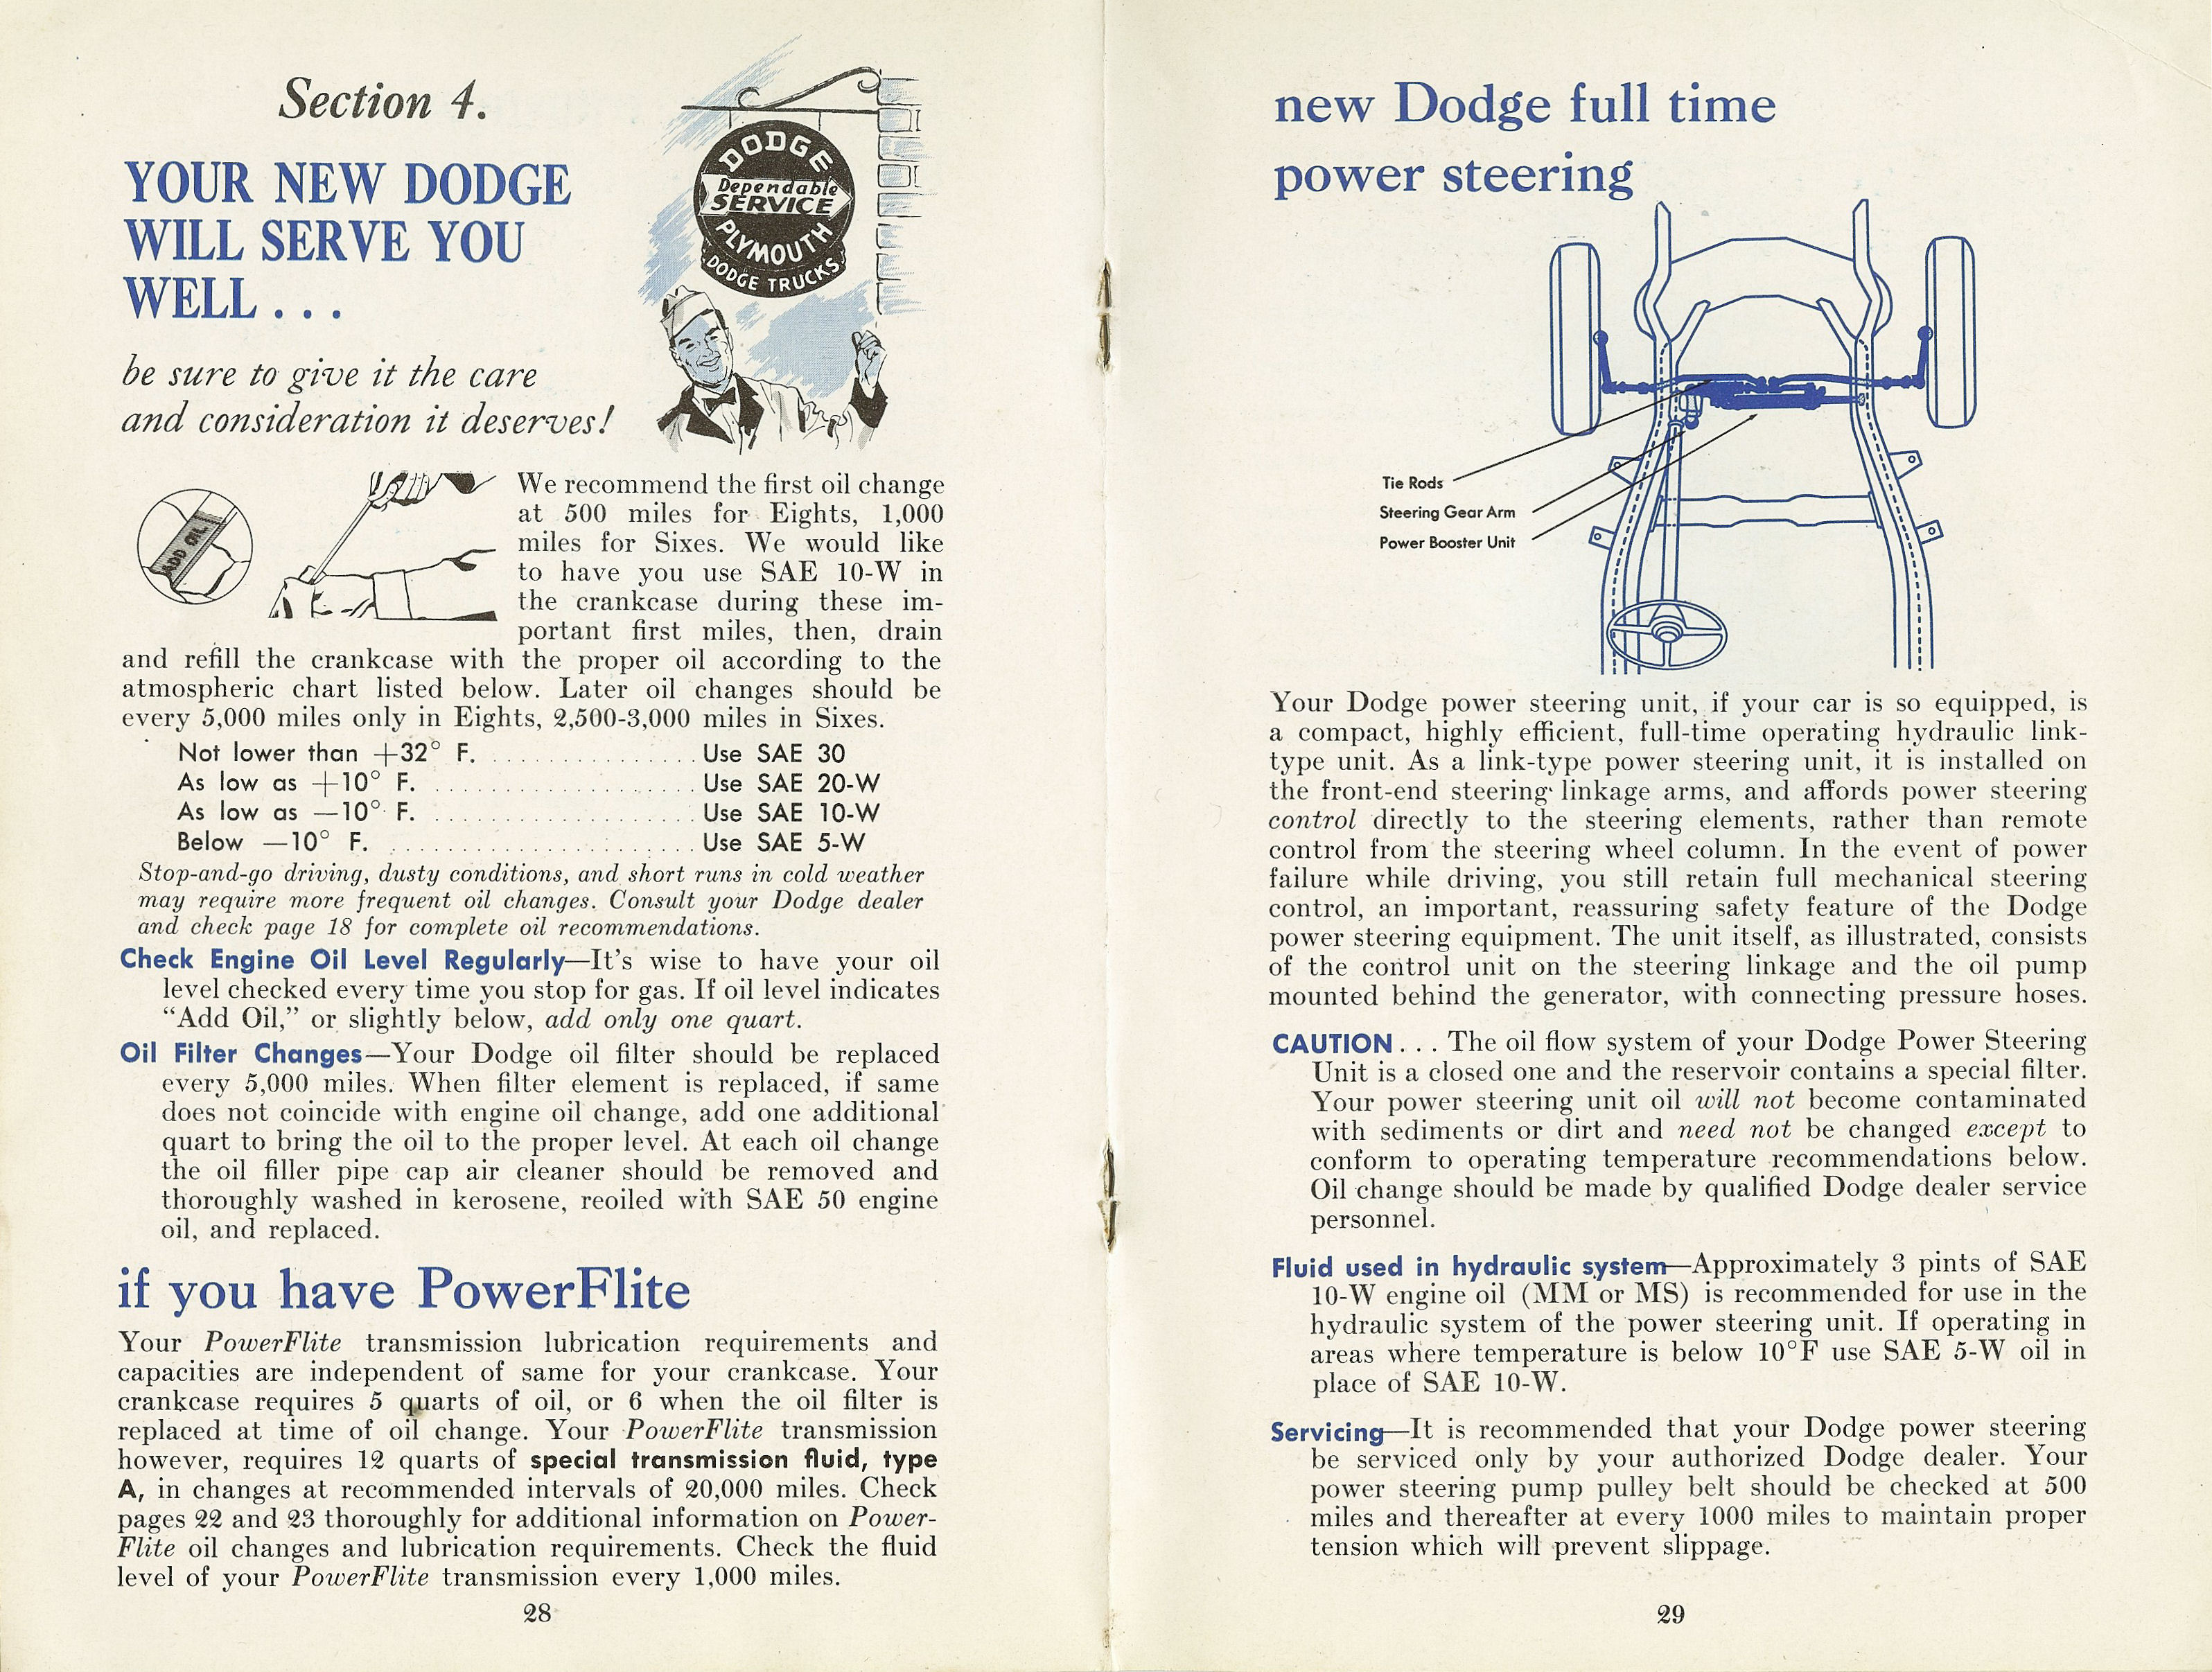 1954_Dodge_Owners_Manual-28-29